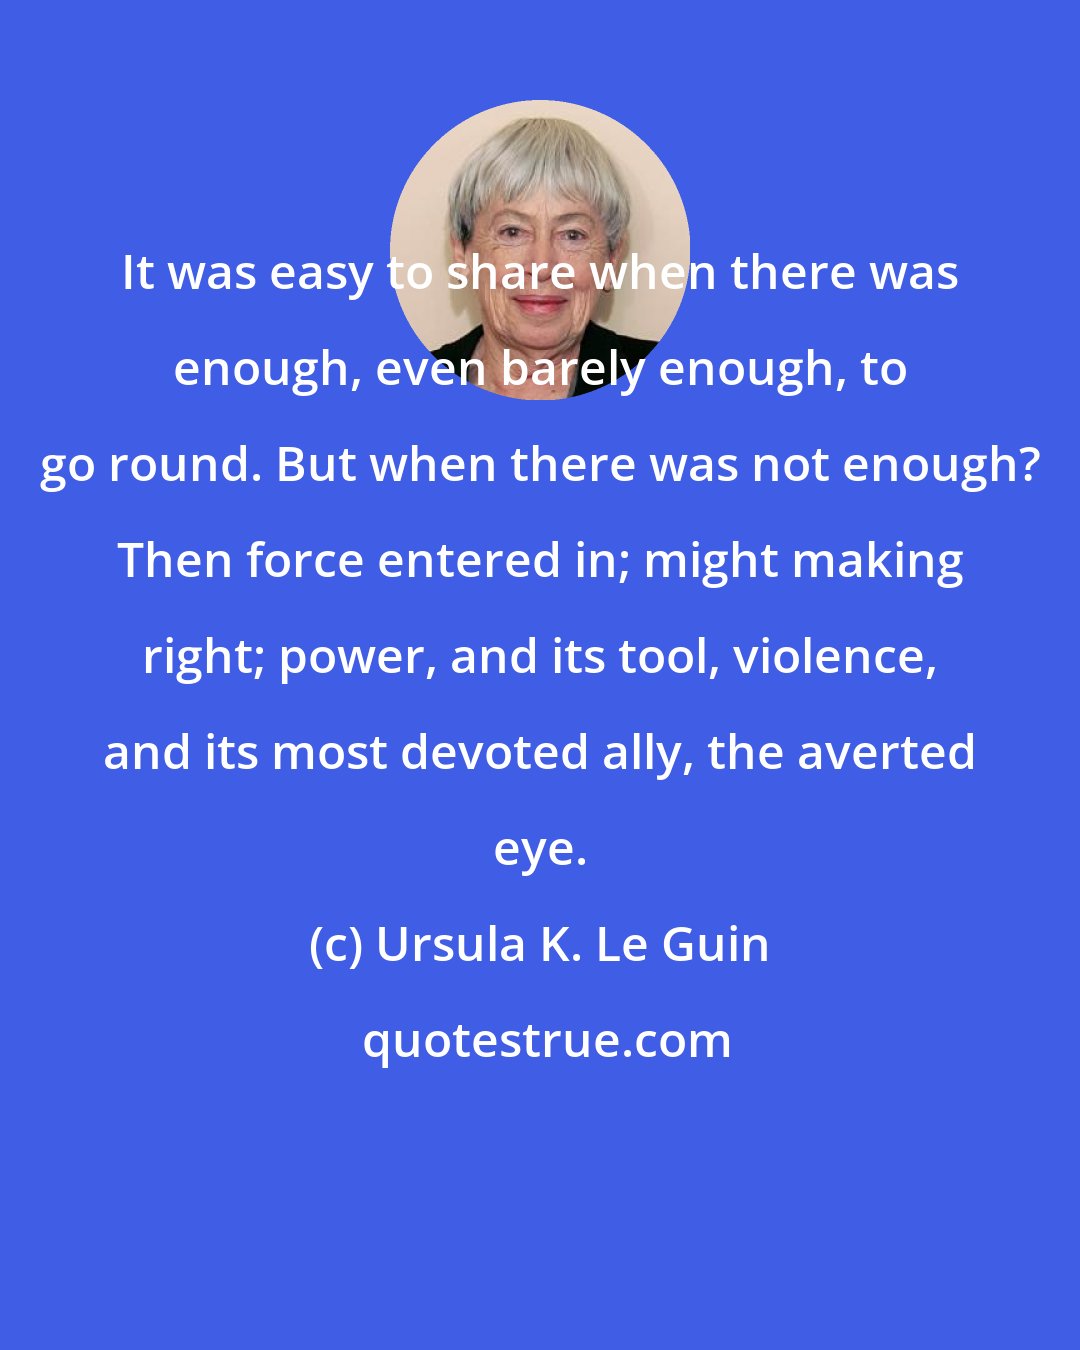 Ursula K. Le Guin: It was easy to share when there was enough, even barely enough, to go round. But when there was not enough? Then force entered in; might making right; power, and its tool, violence, and its most devoted ally, the averted eye.